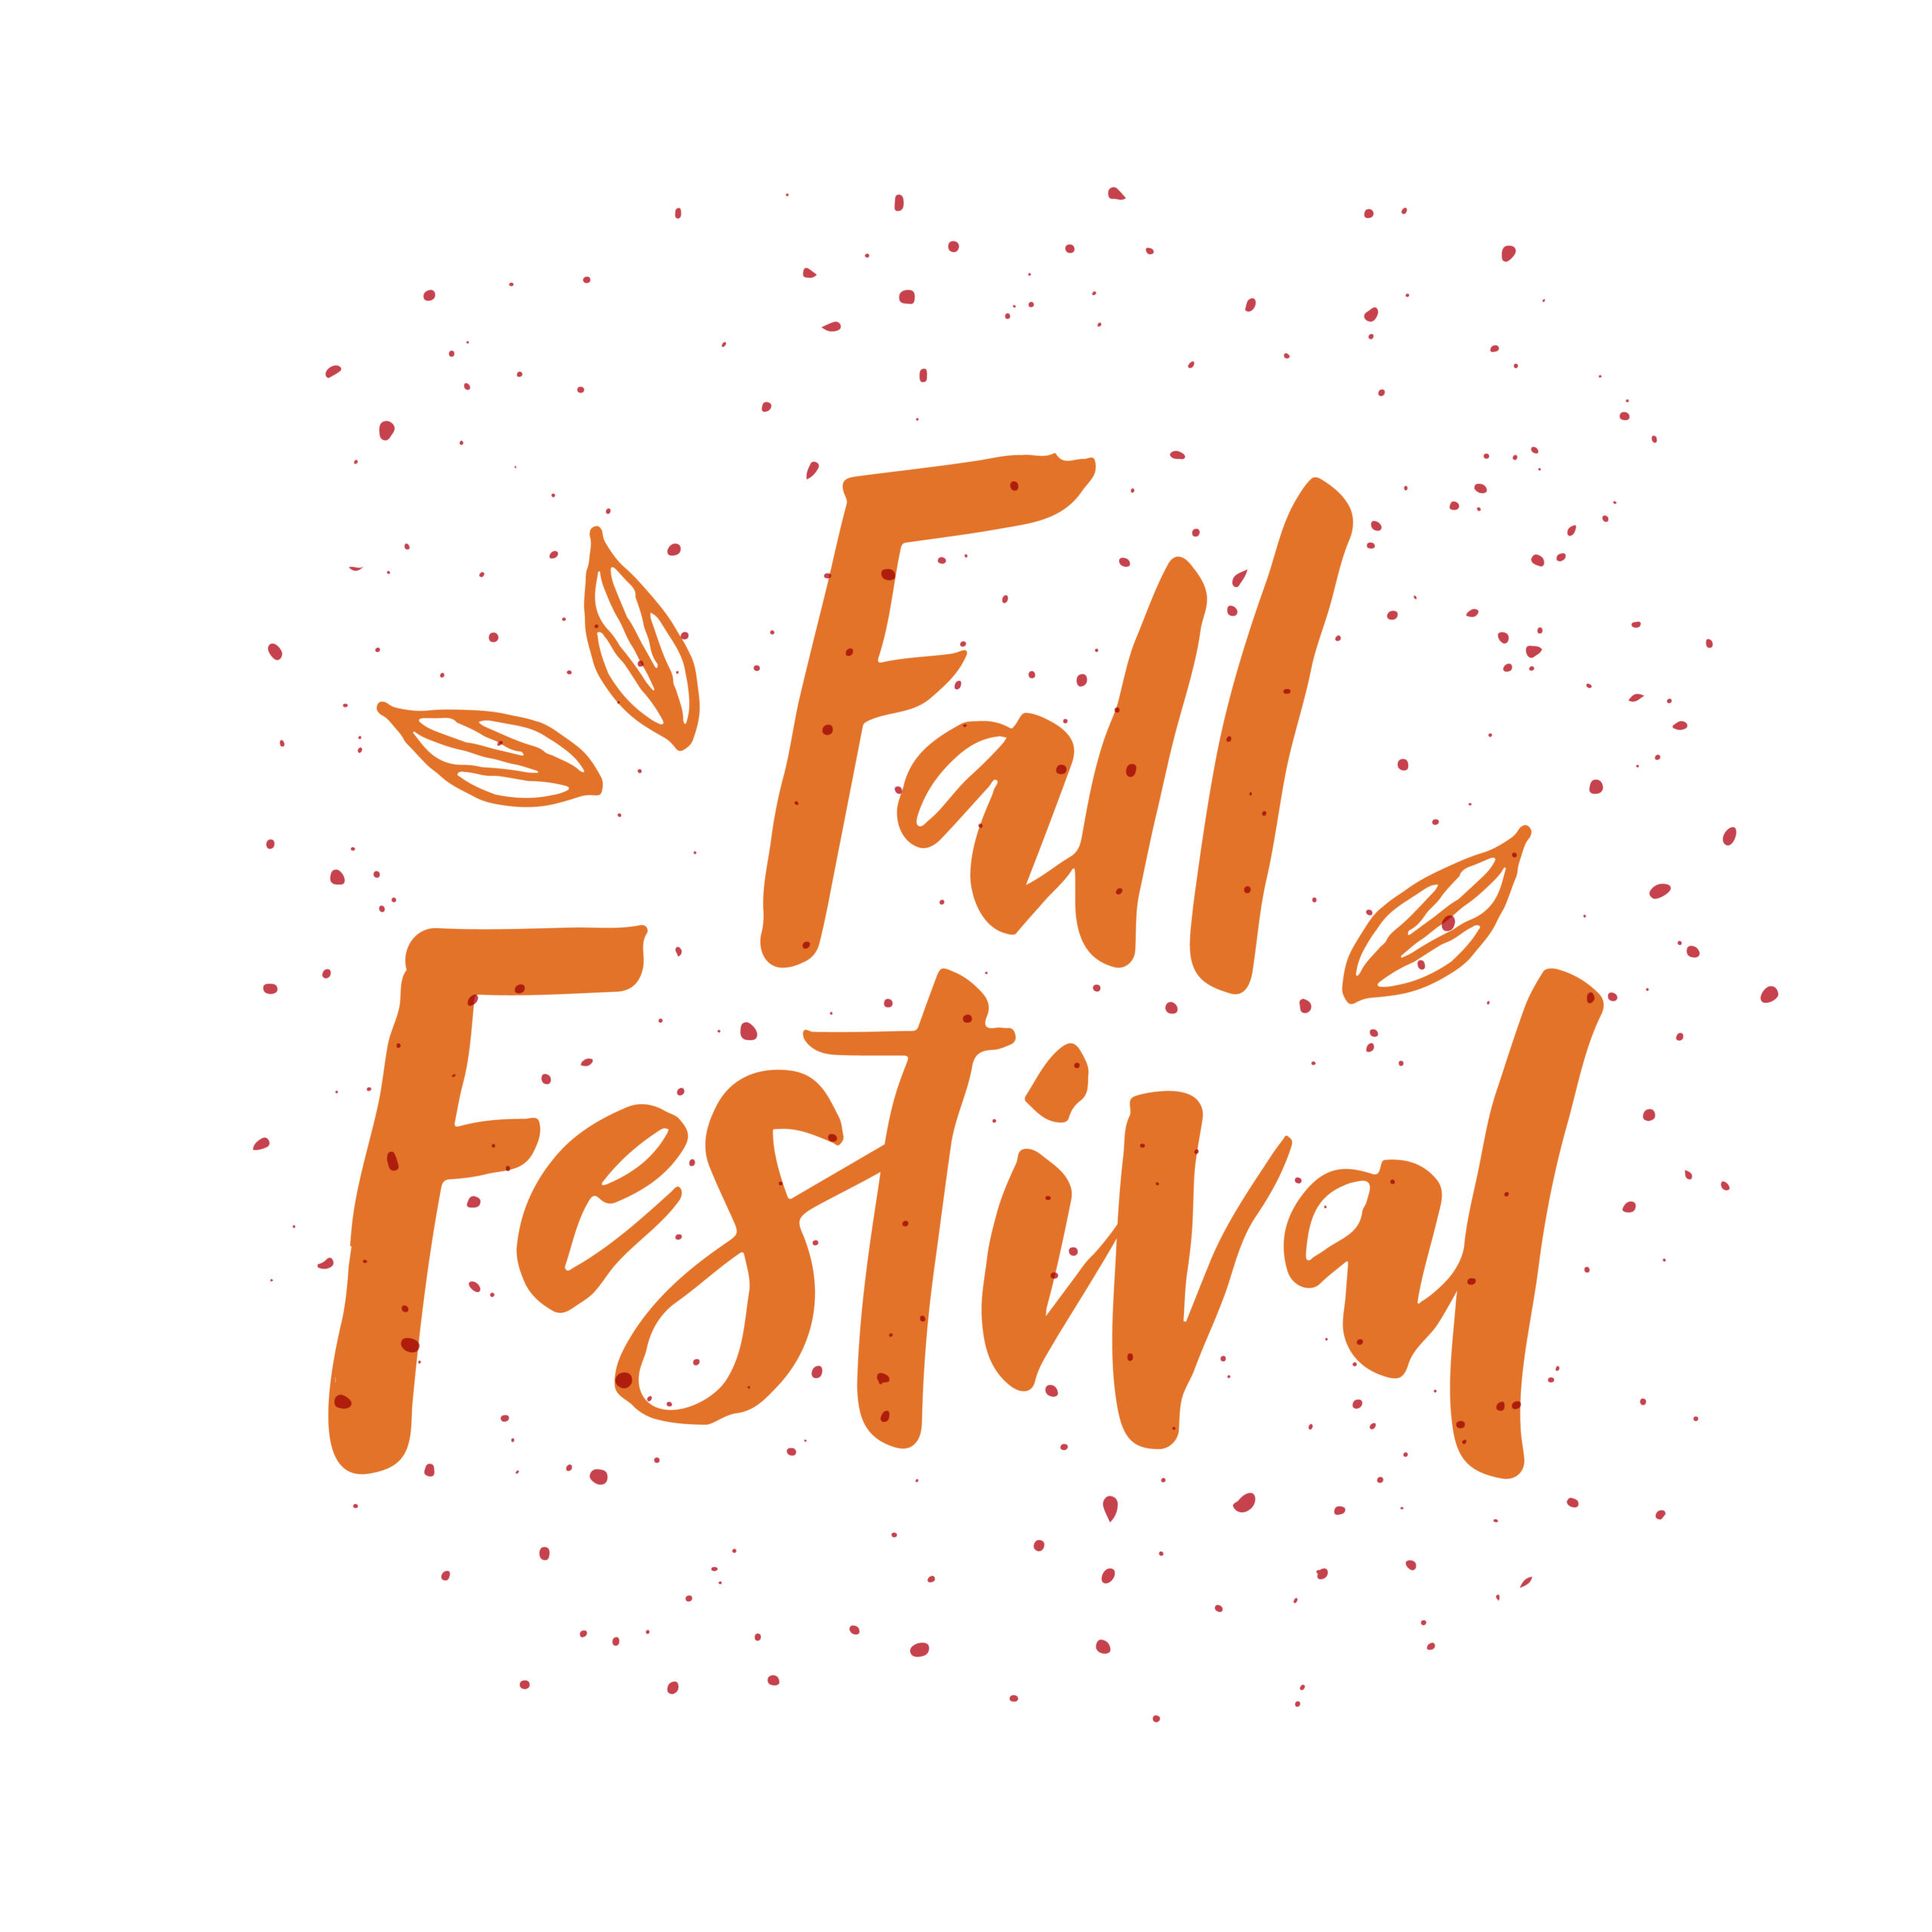 Fall,Festival,-,Hand,Drawn,Lettering,Phrase,With,Leaves.,Harvest